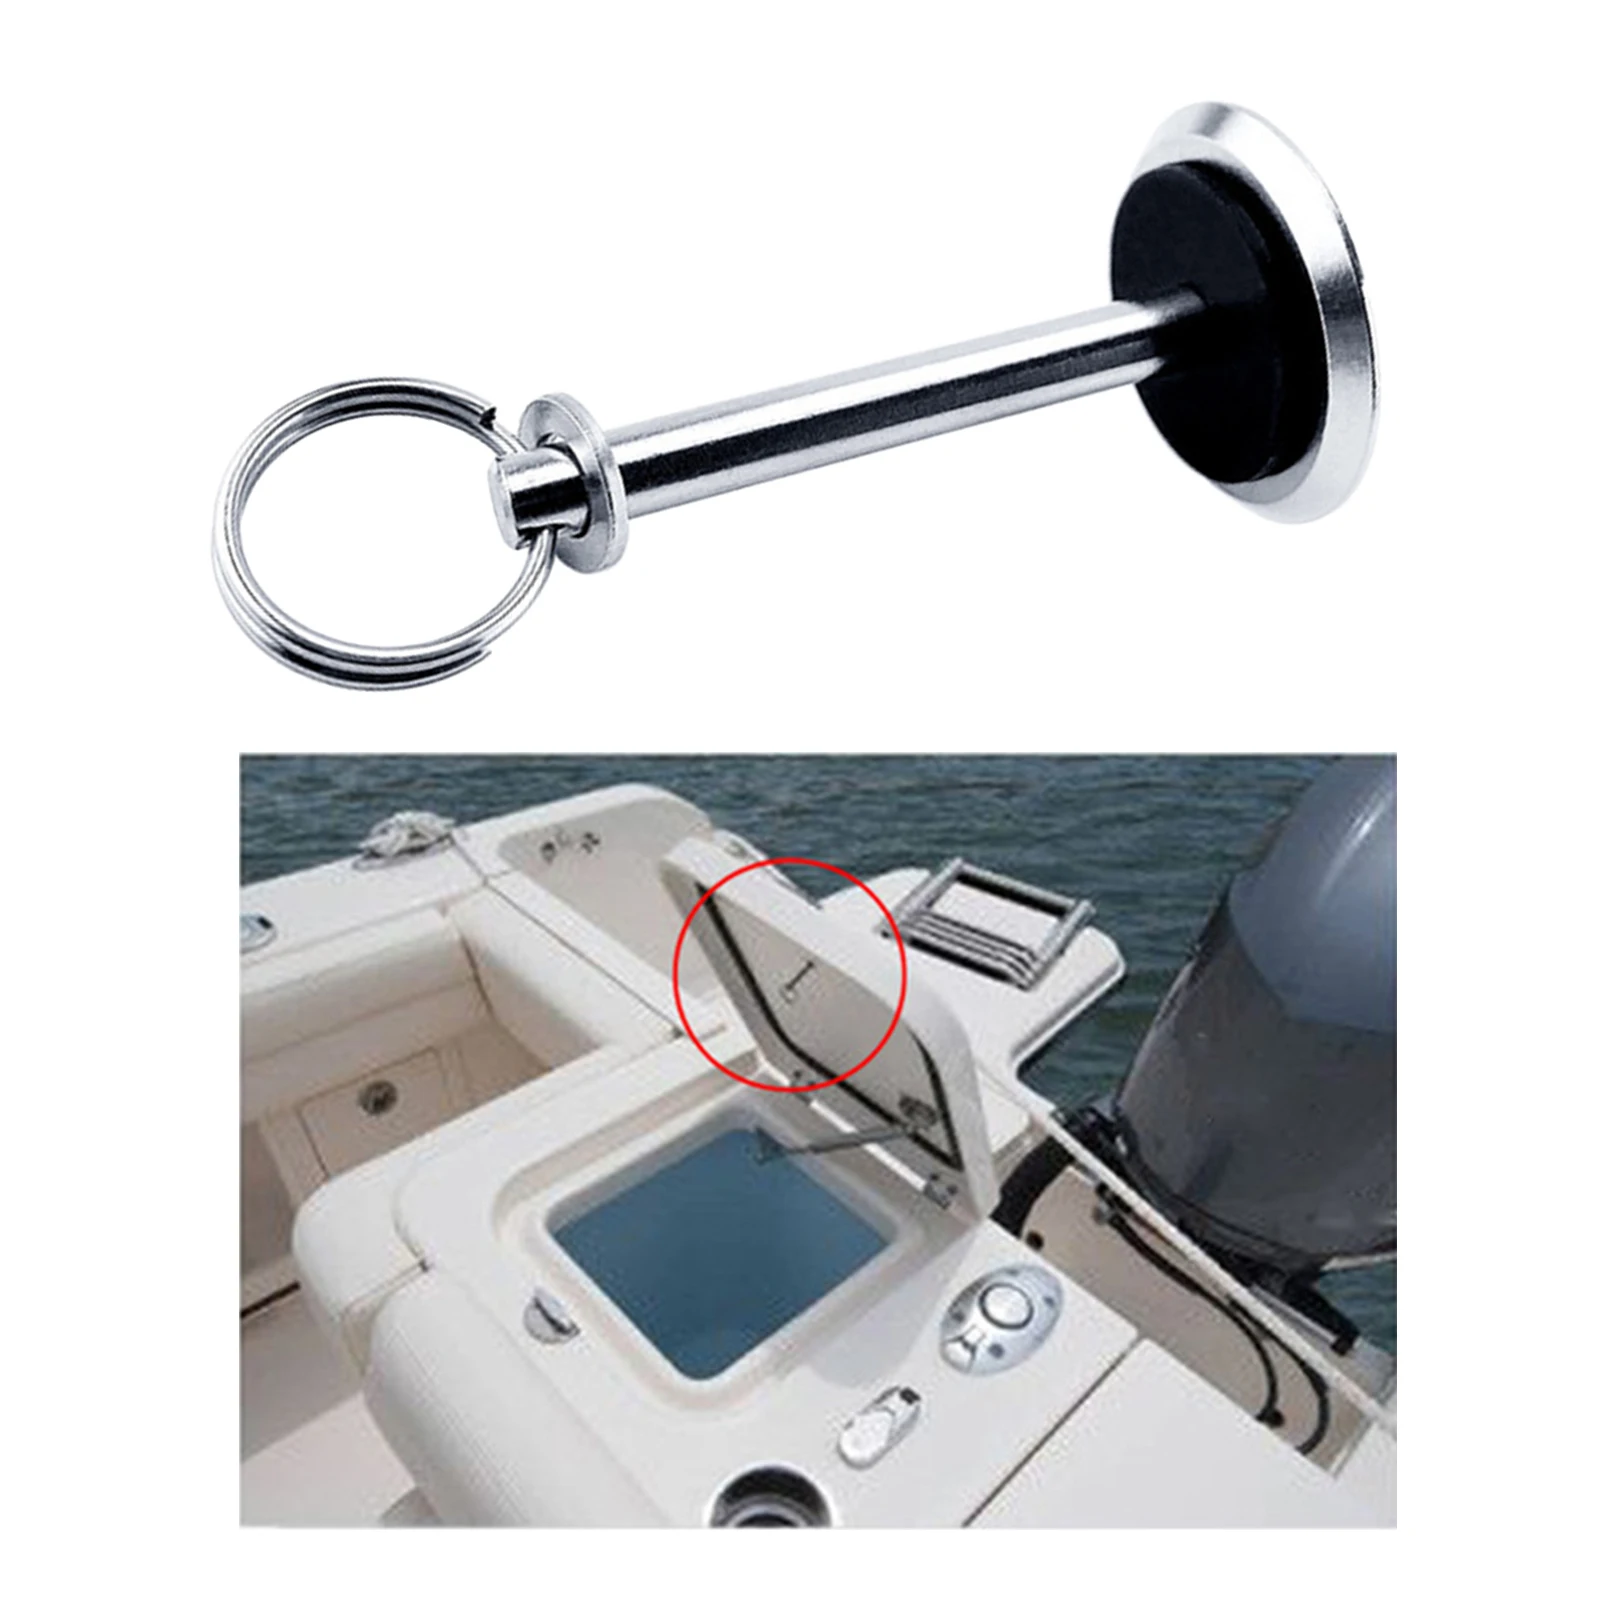 Hatch Cover Pull Handle Stainless Steel Lid Lift Pull for Boat Storage Engine Cover Floor Storage Loft Ladders